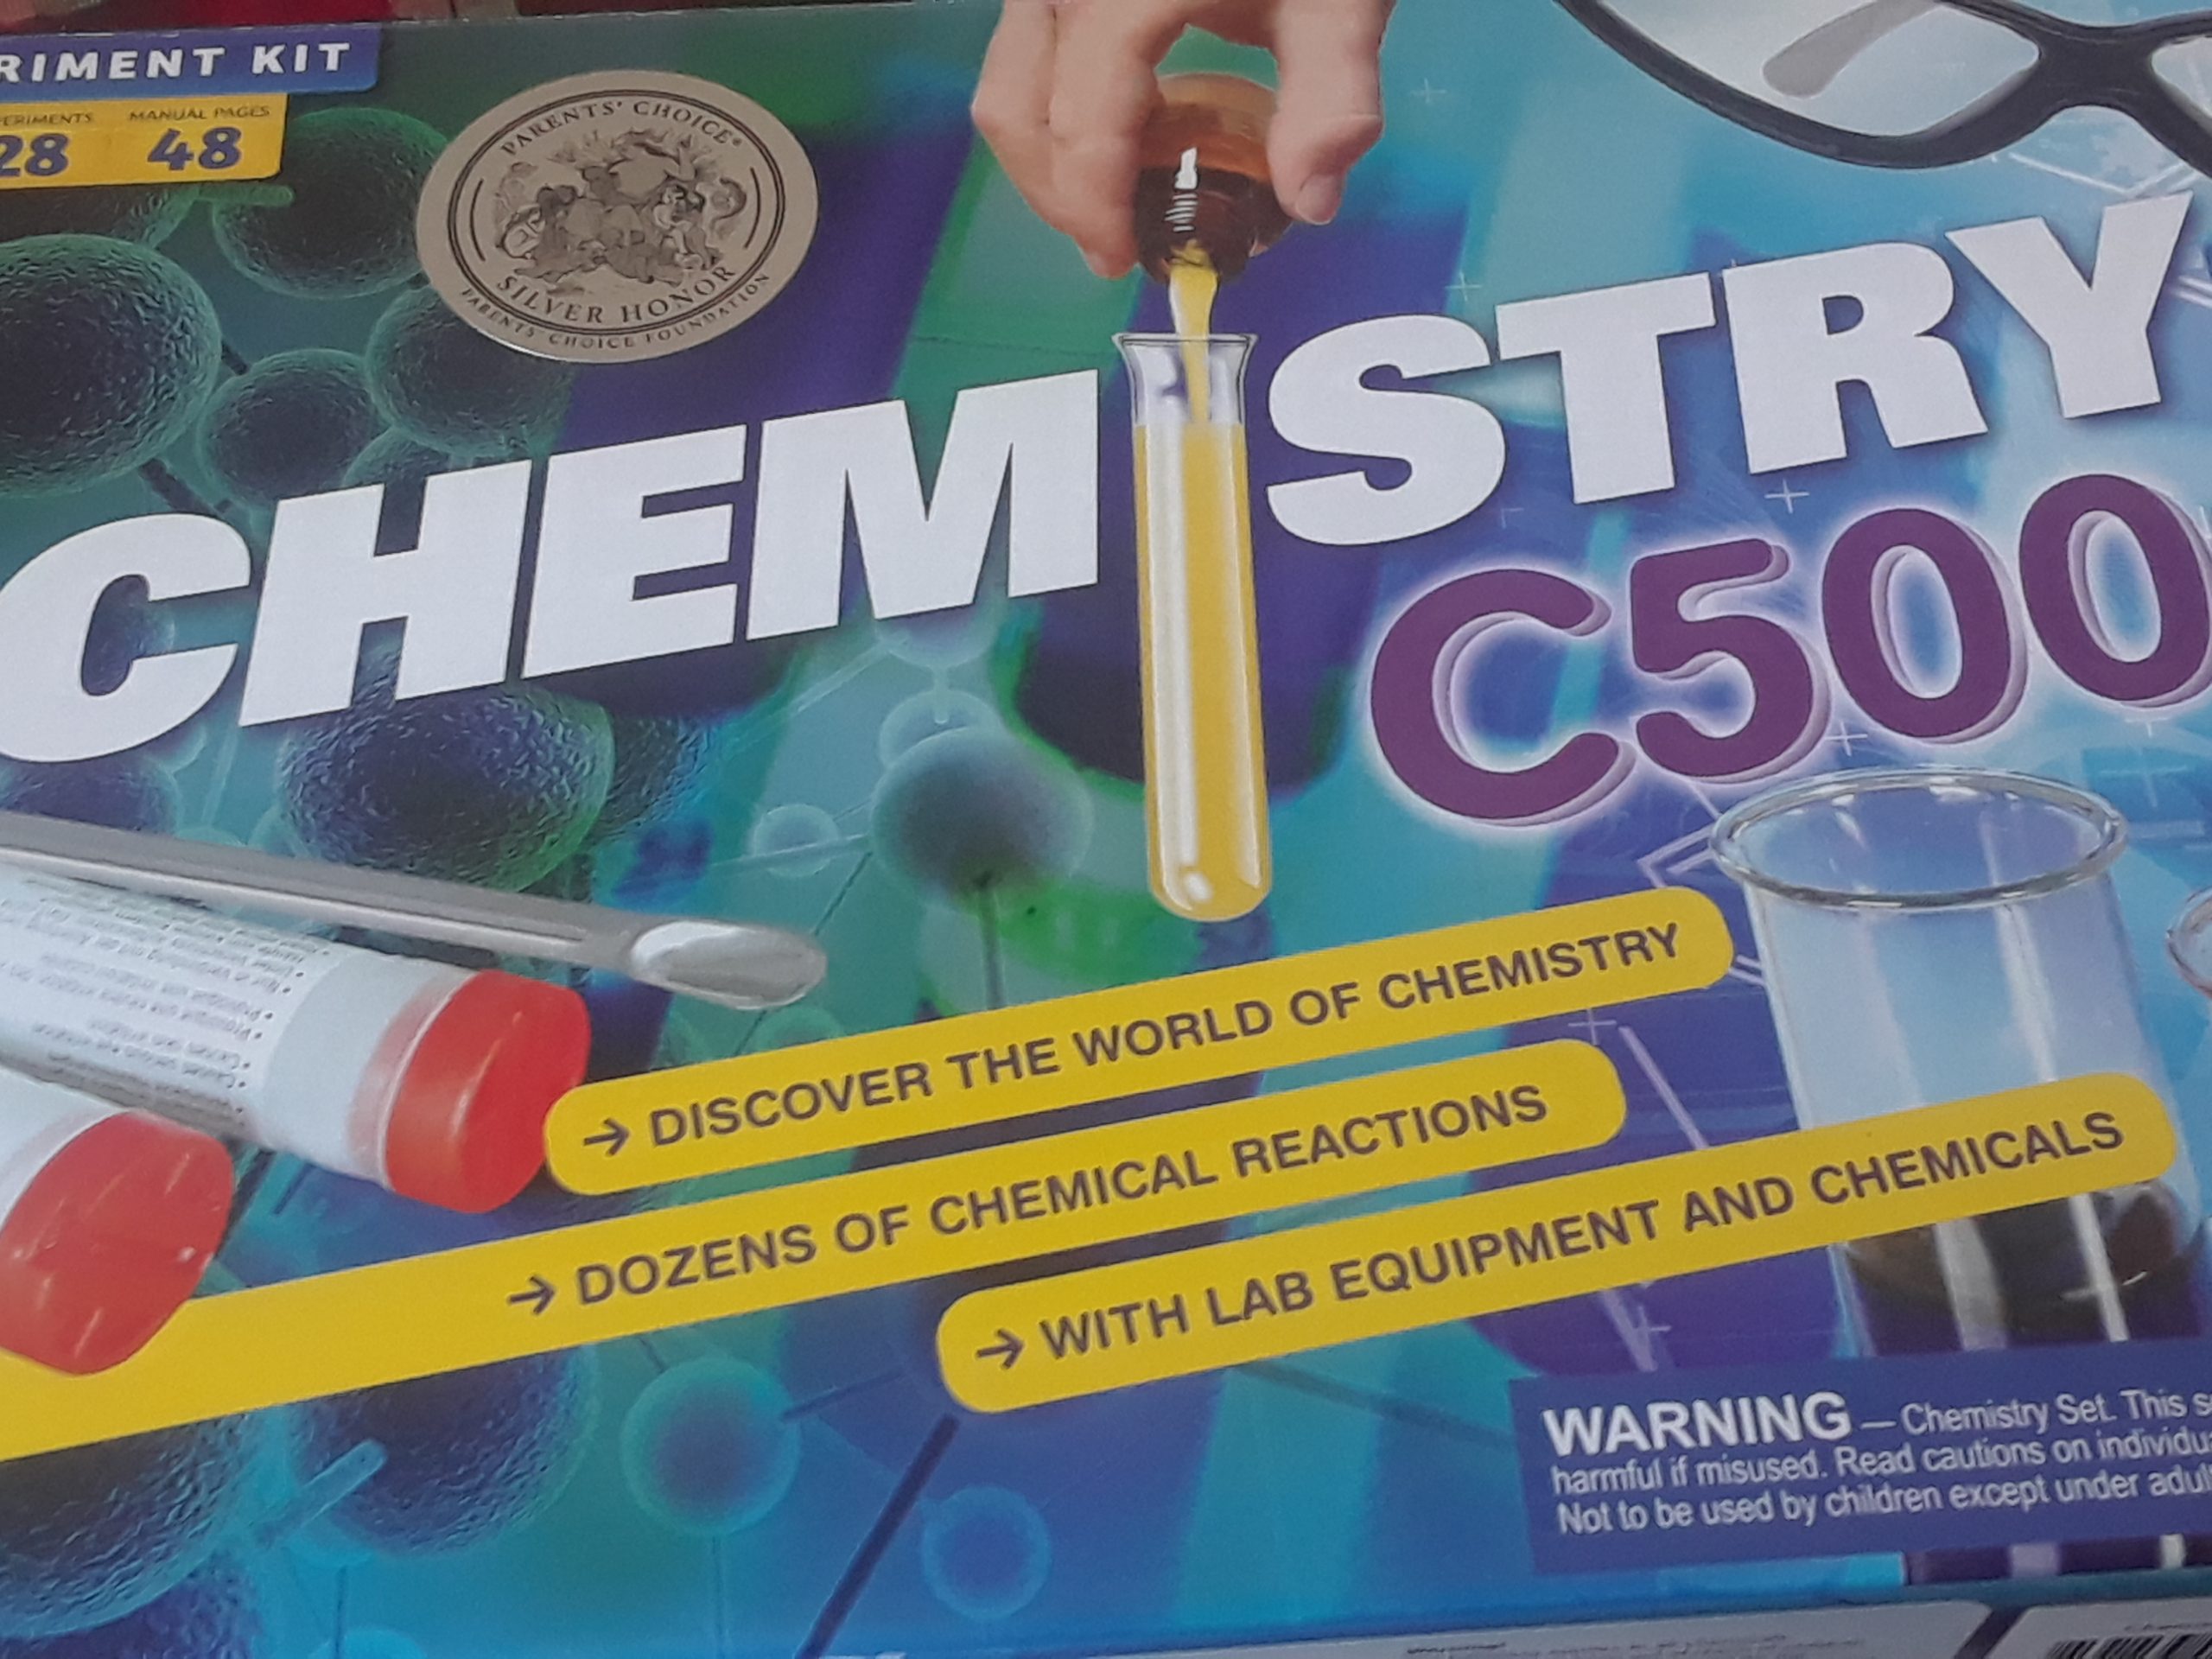 Chemistry C500 From Thames And Kosmos #Review #HGG18 @thamesandkosmos